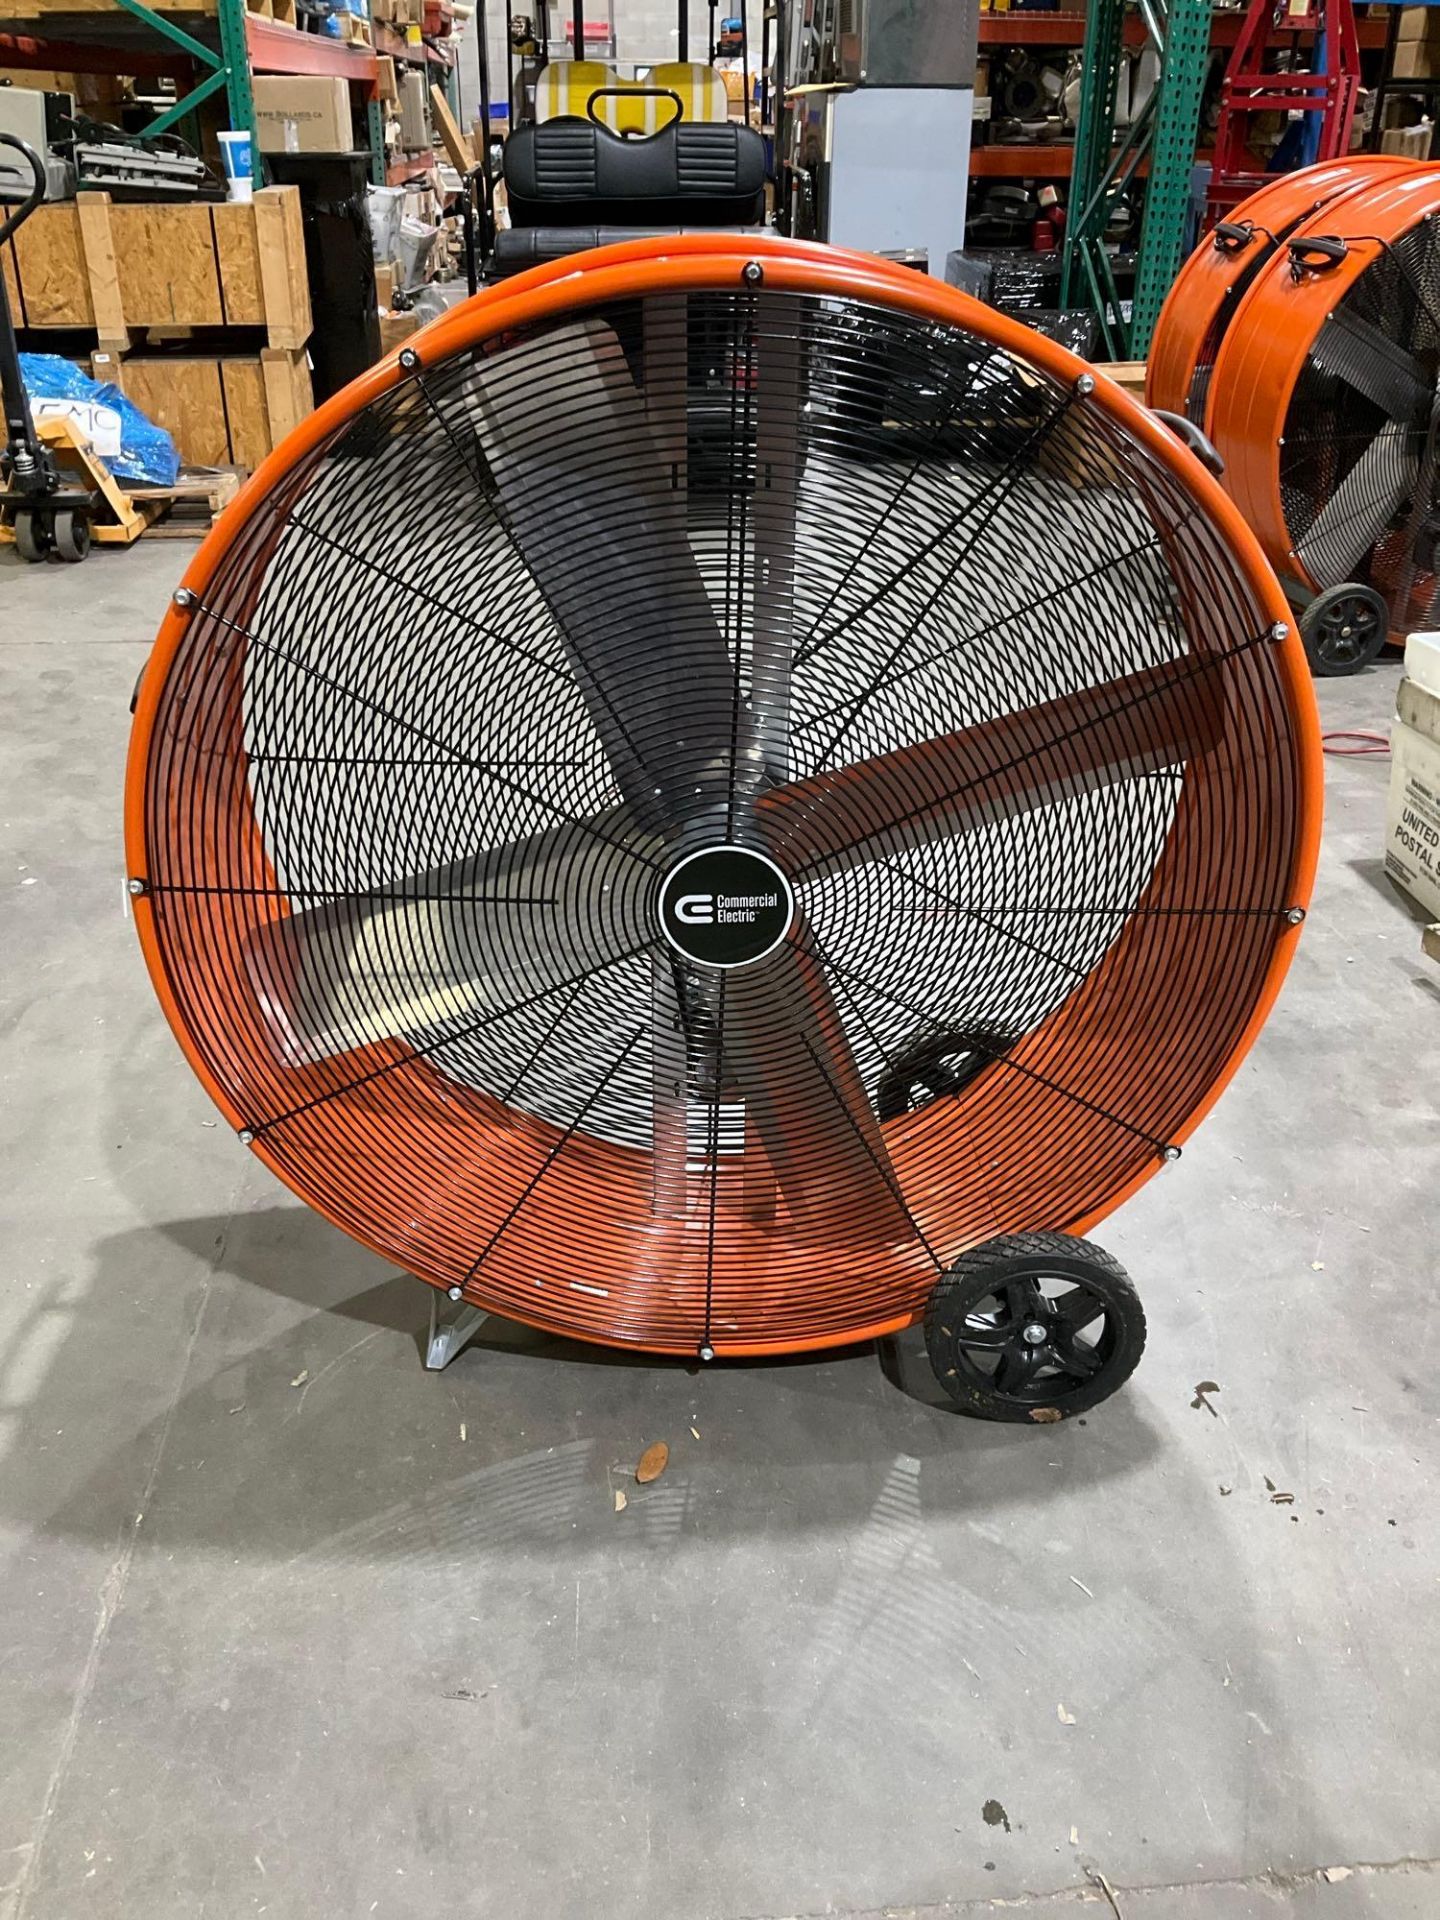 UNUSED 42" COMMERCIAL ELECTRIC PORTABLE BARREL FAN - Image 3 of 7